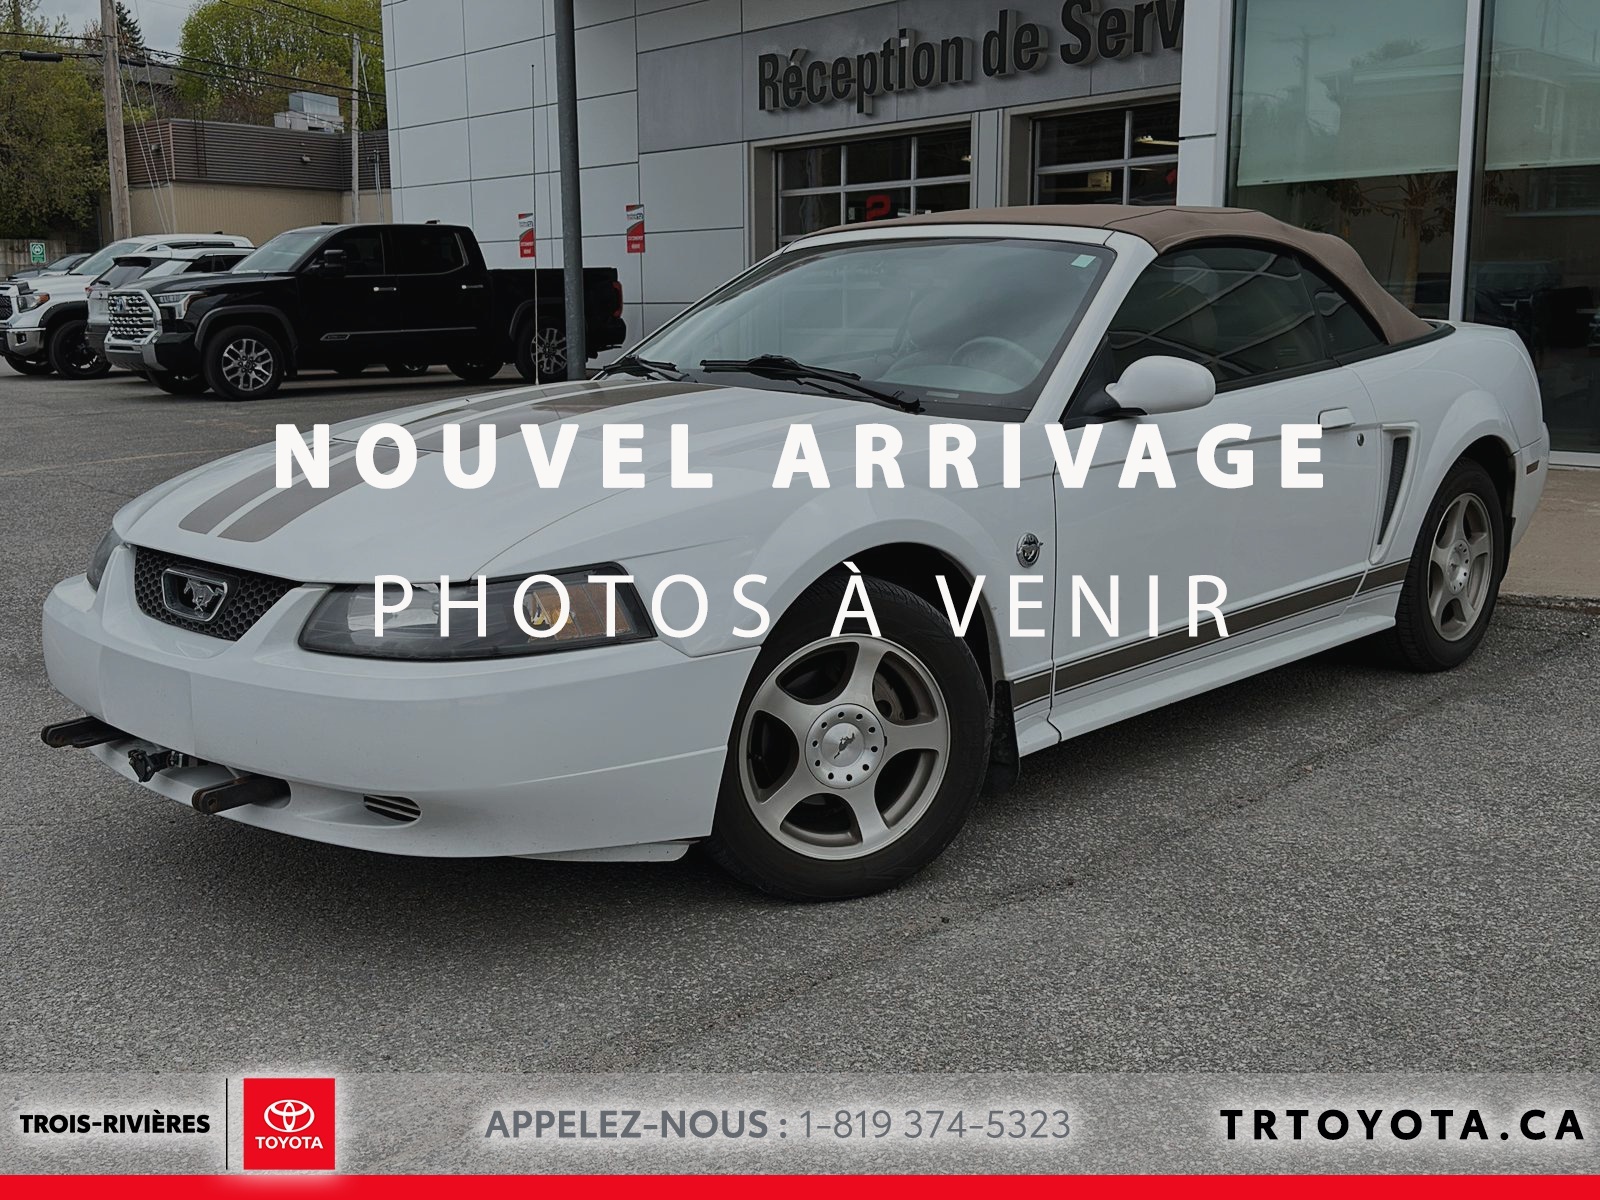 2004 Ford Mustang Cabriolet 2 portes